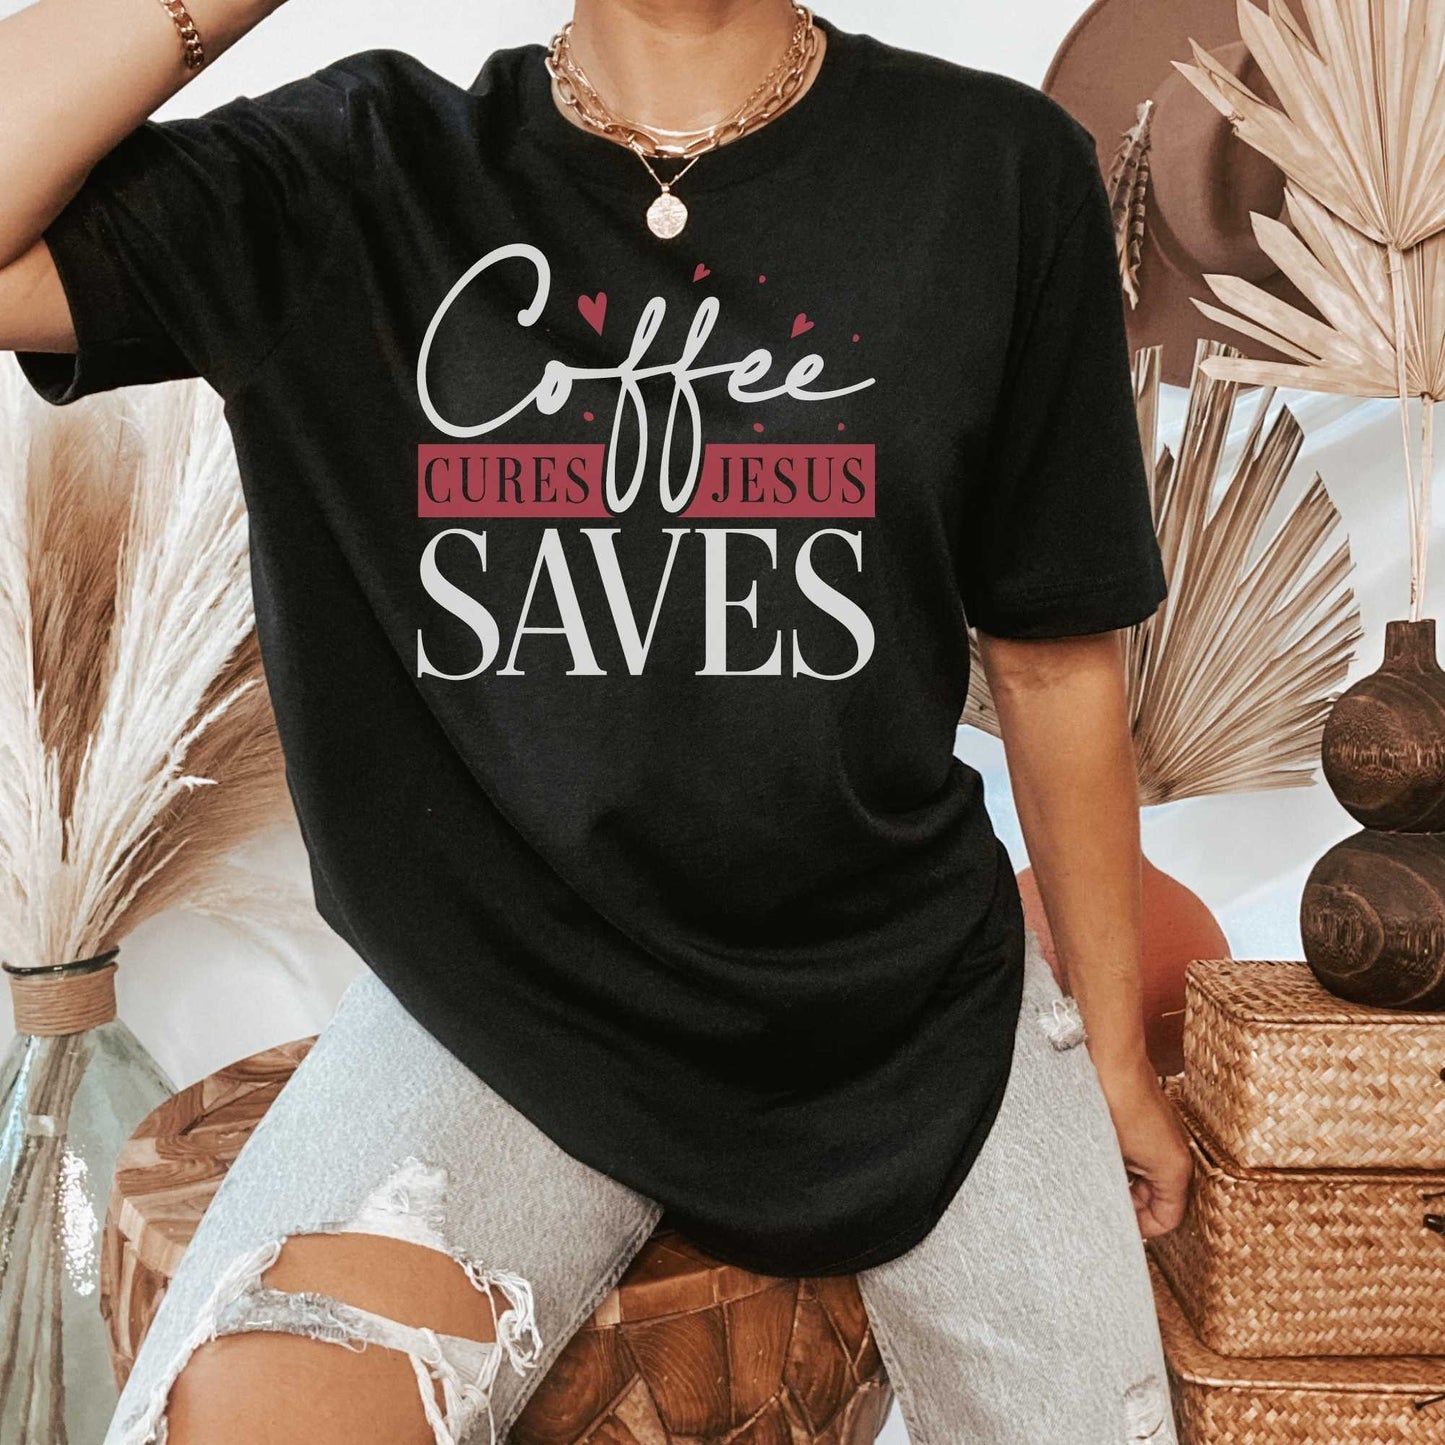 Coffee Cures Jesus Saves, Funny Shirts and Jesus and Coffee